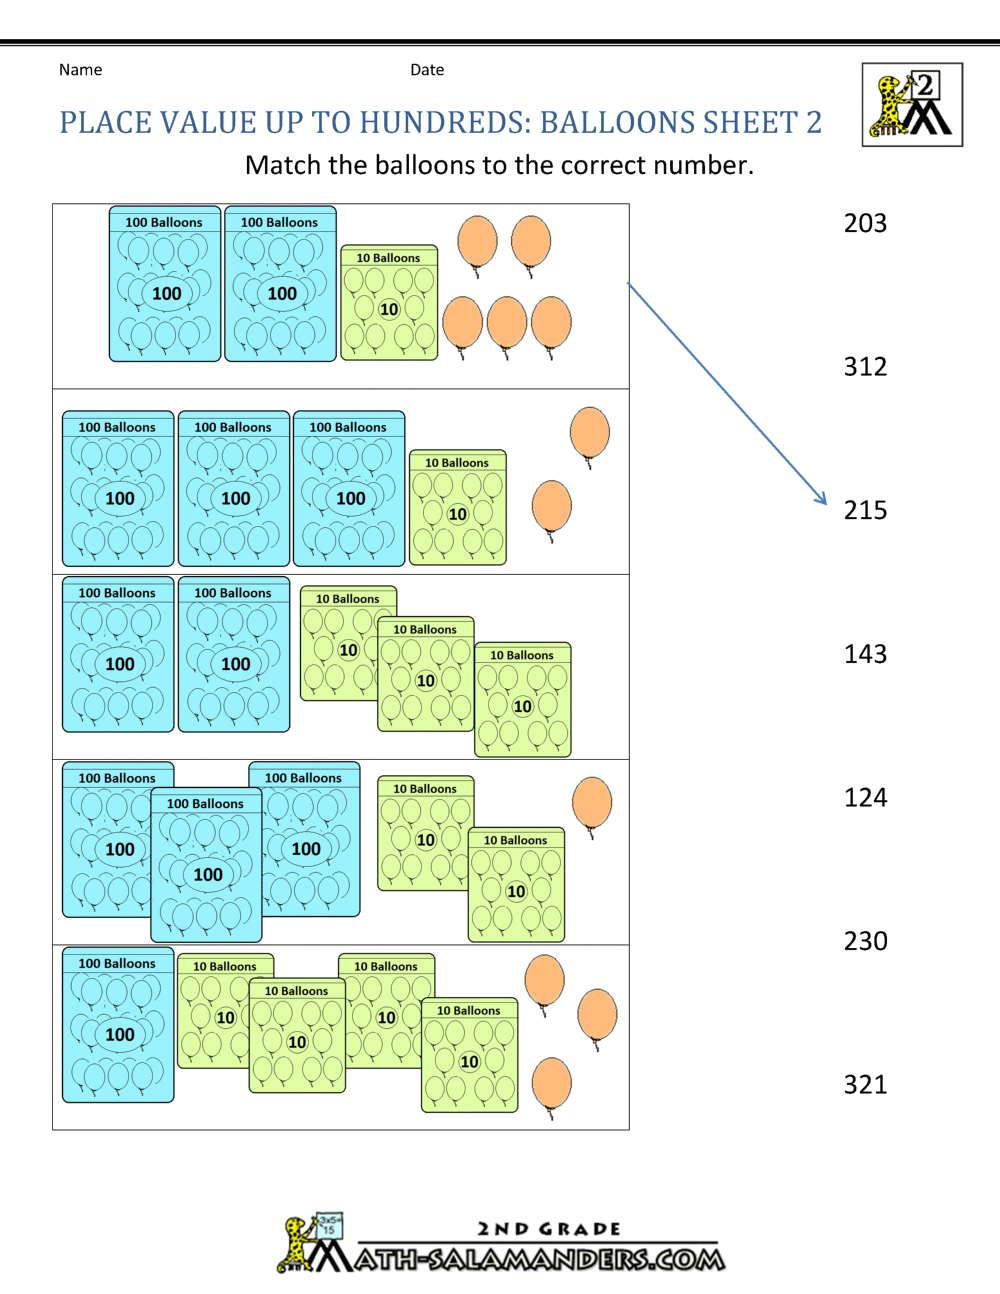 place-value-blocks-with-3-digit-number